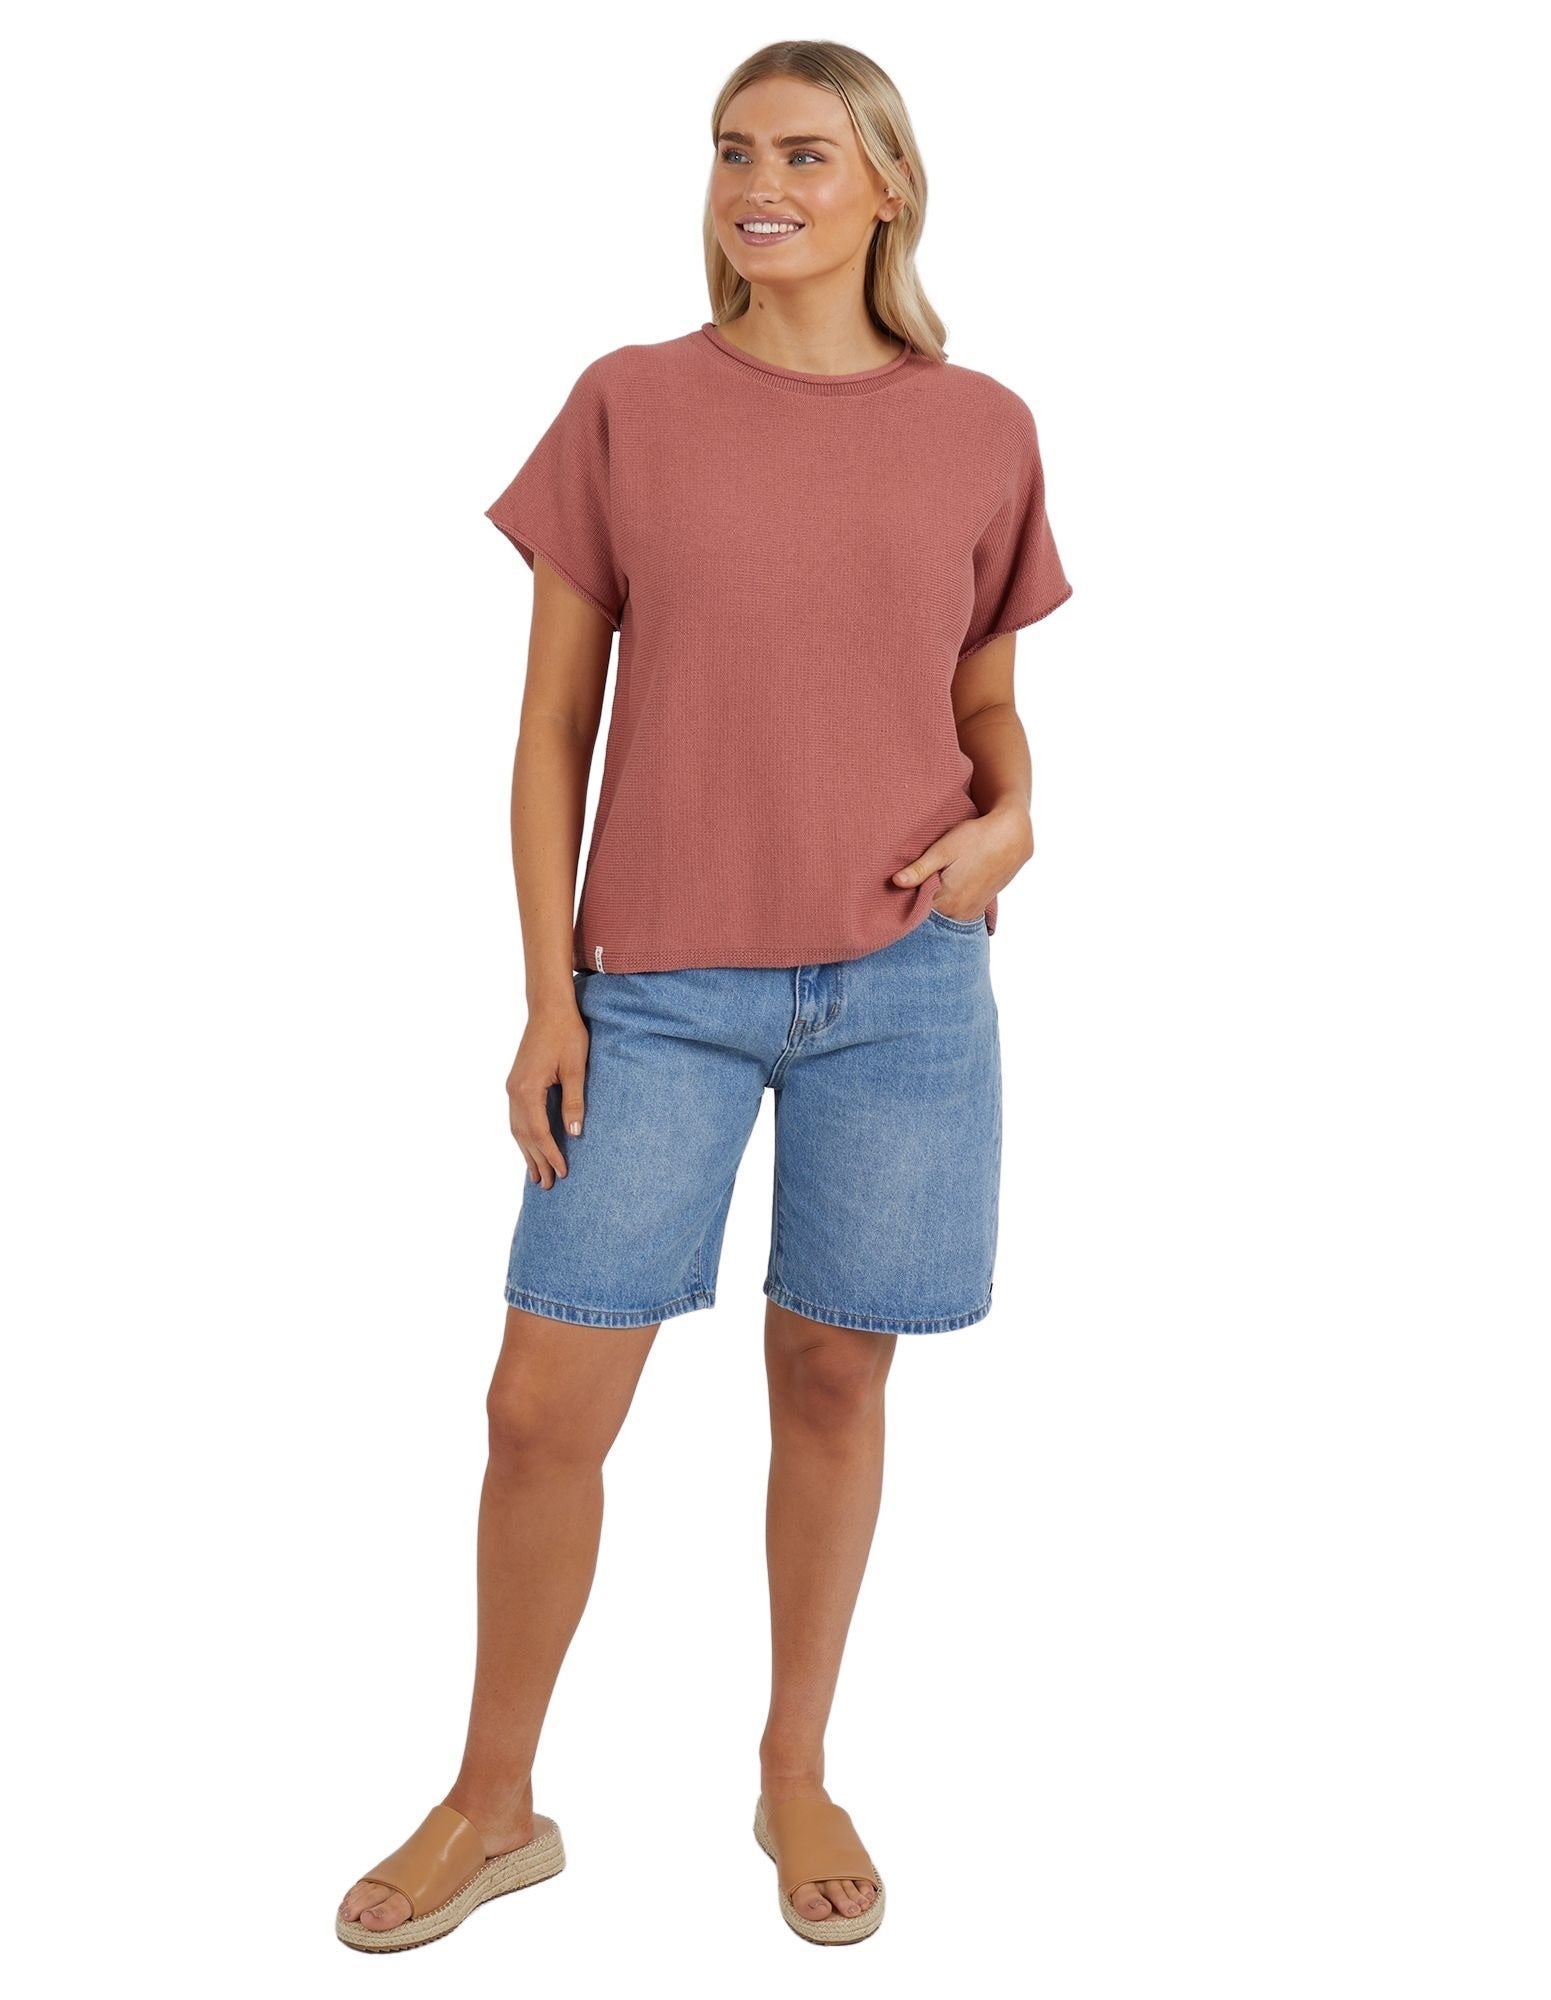 Elm - Rose Short Sleeve Knit - Clay - Last One Size M!